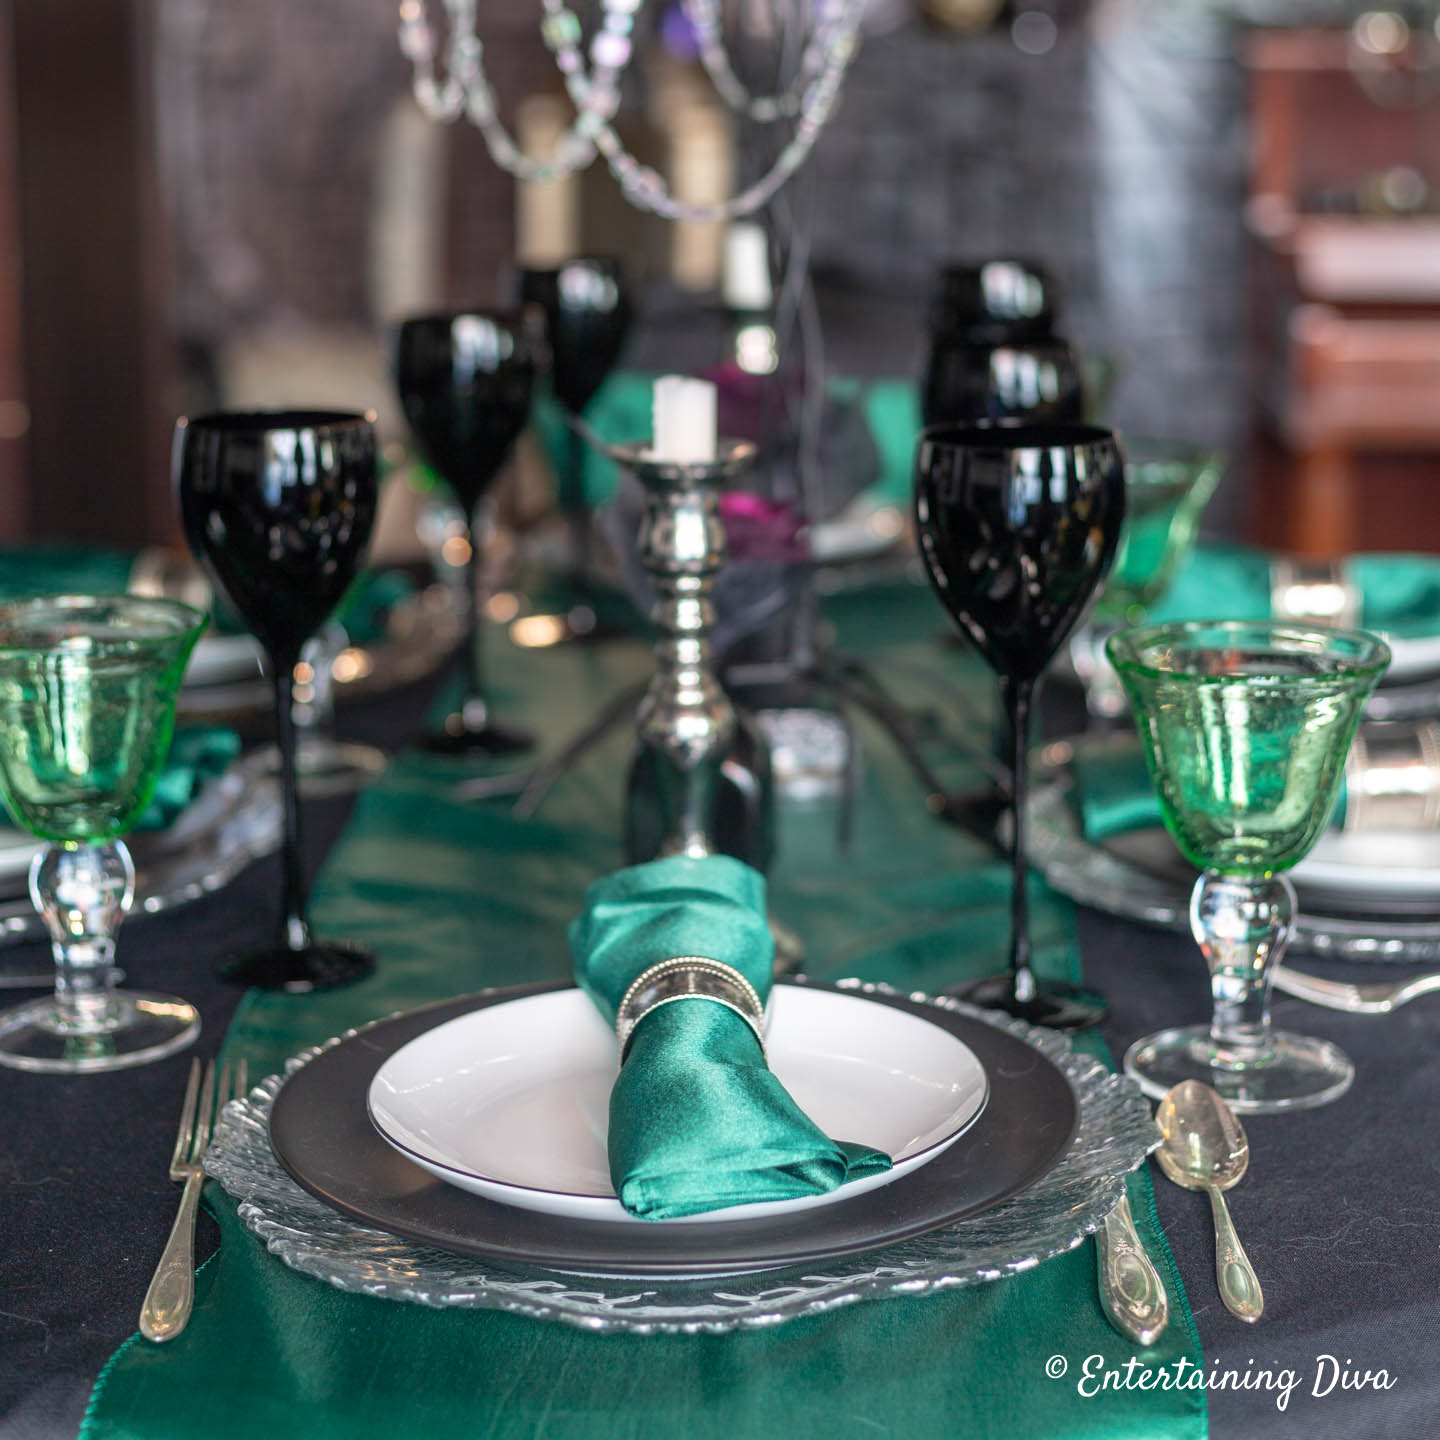 Harry Potter table decorations for Slytherin house using green, silver and black